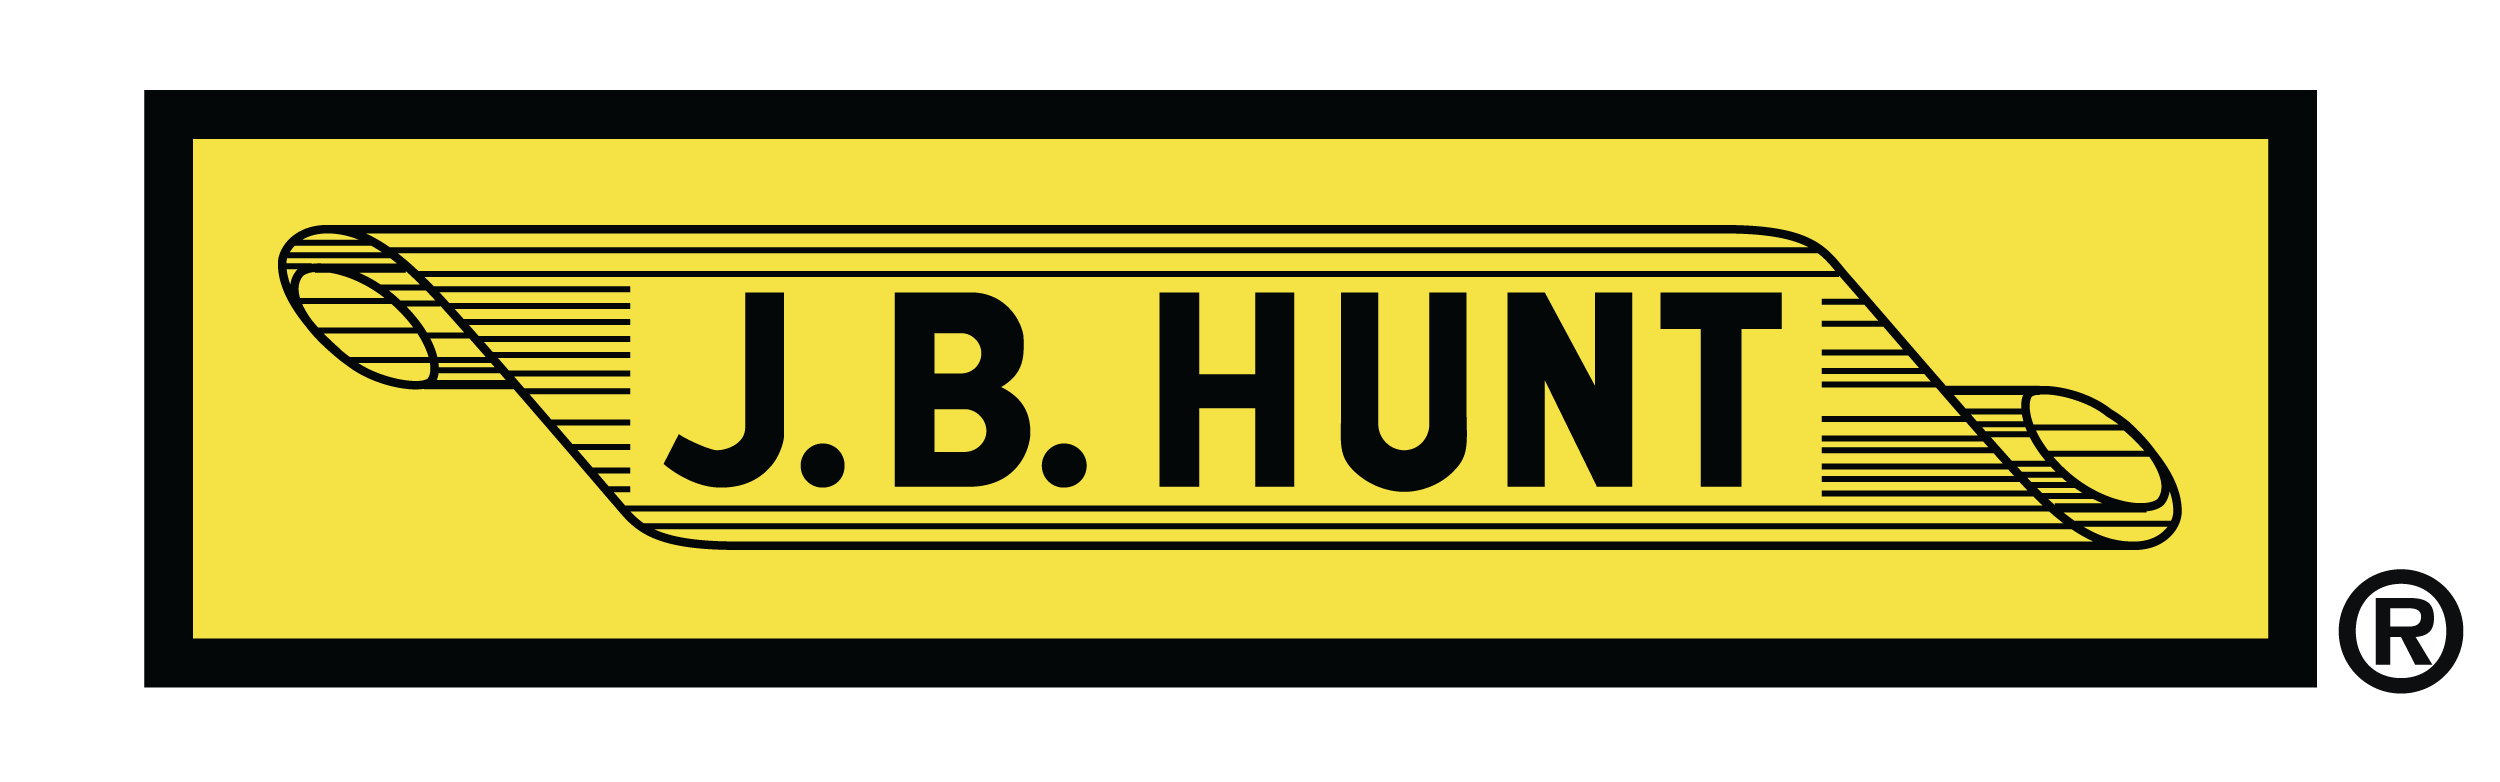 J.B. Hunt logo with bold black letters on a yellow background